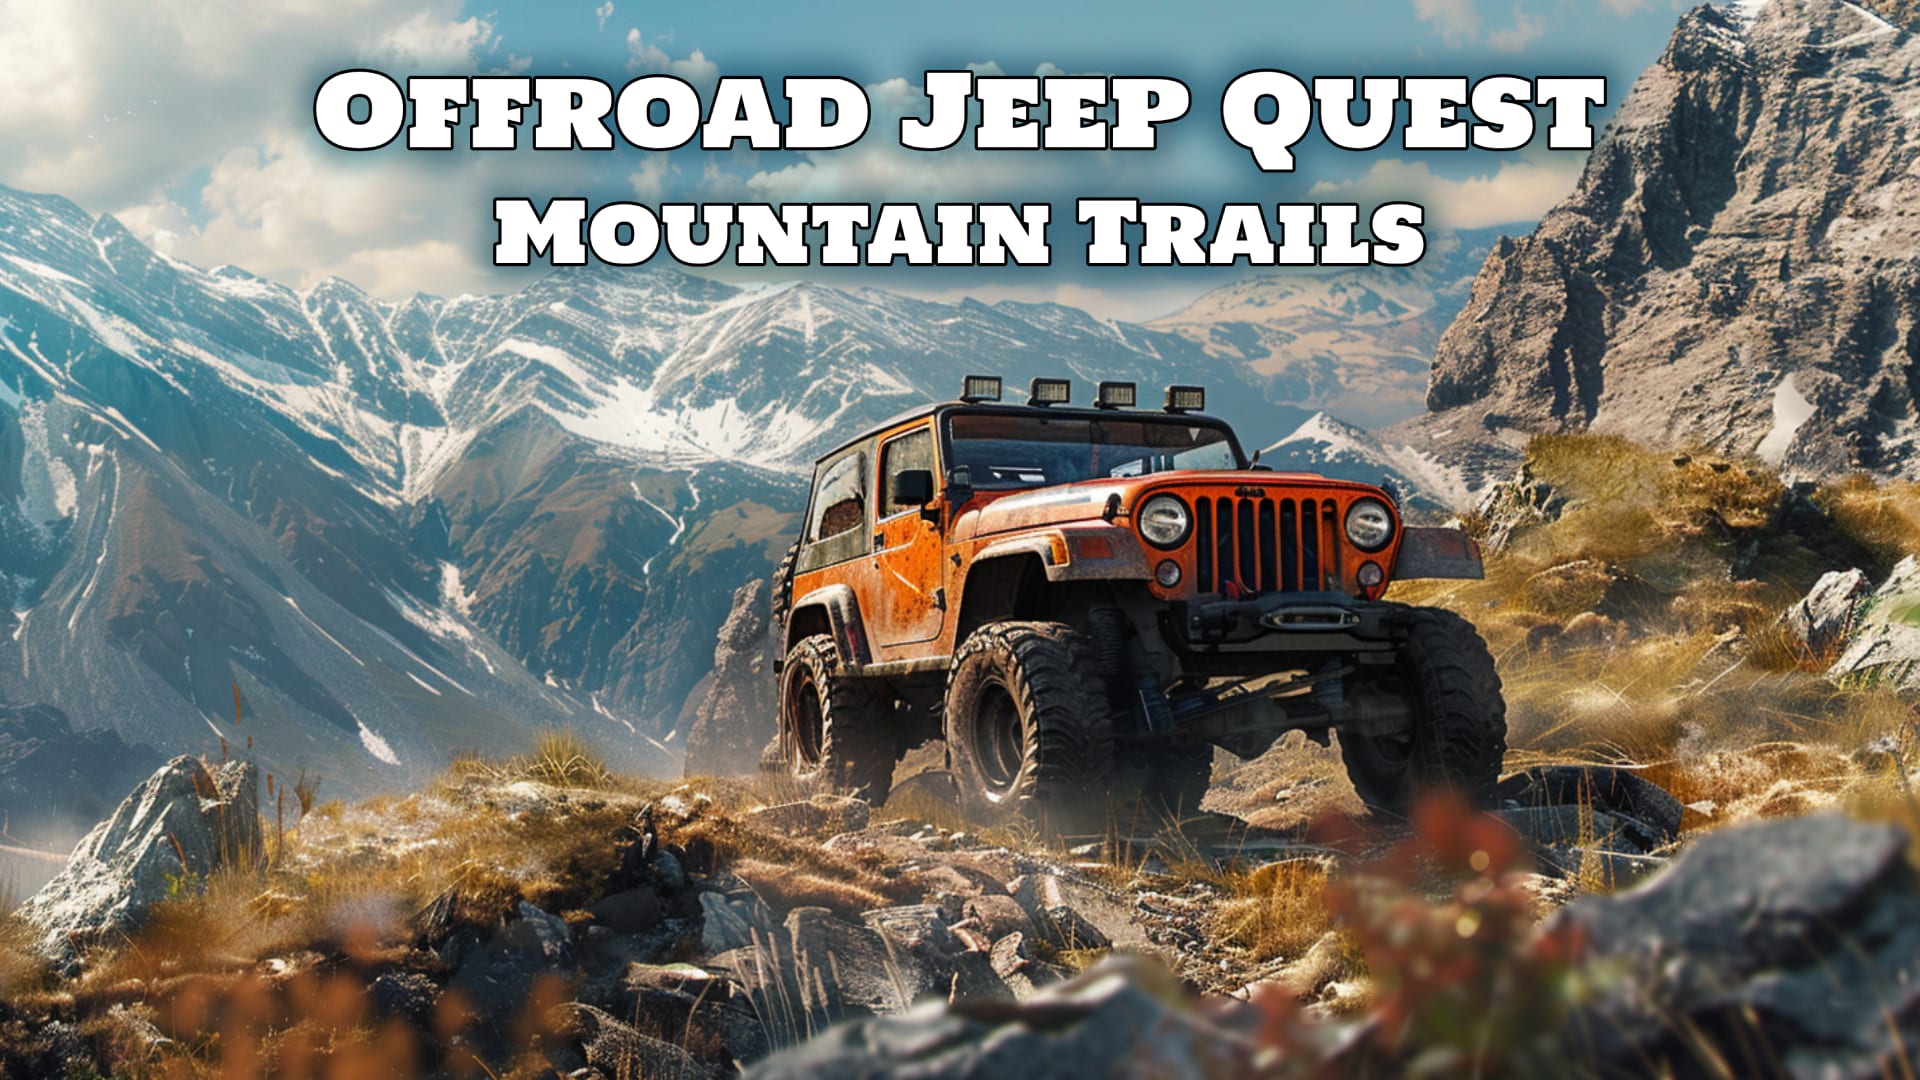 Offroad Jeep Quest: Mountain Trails 1